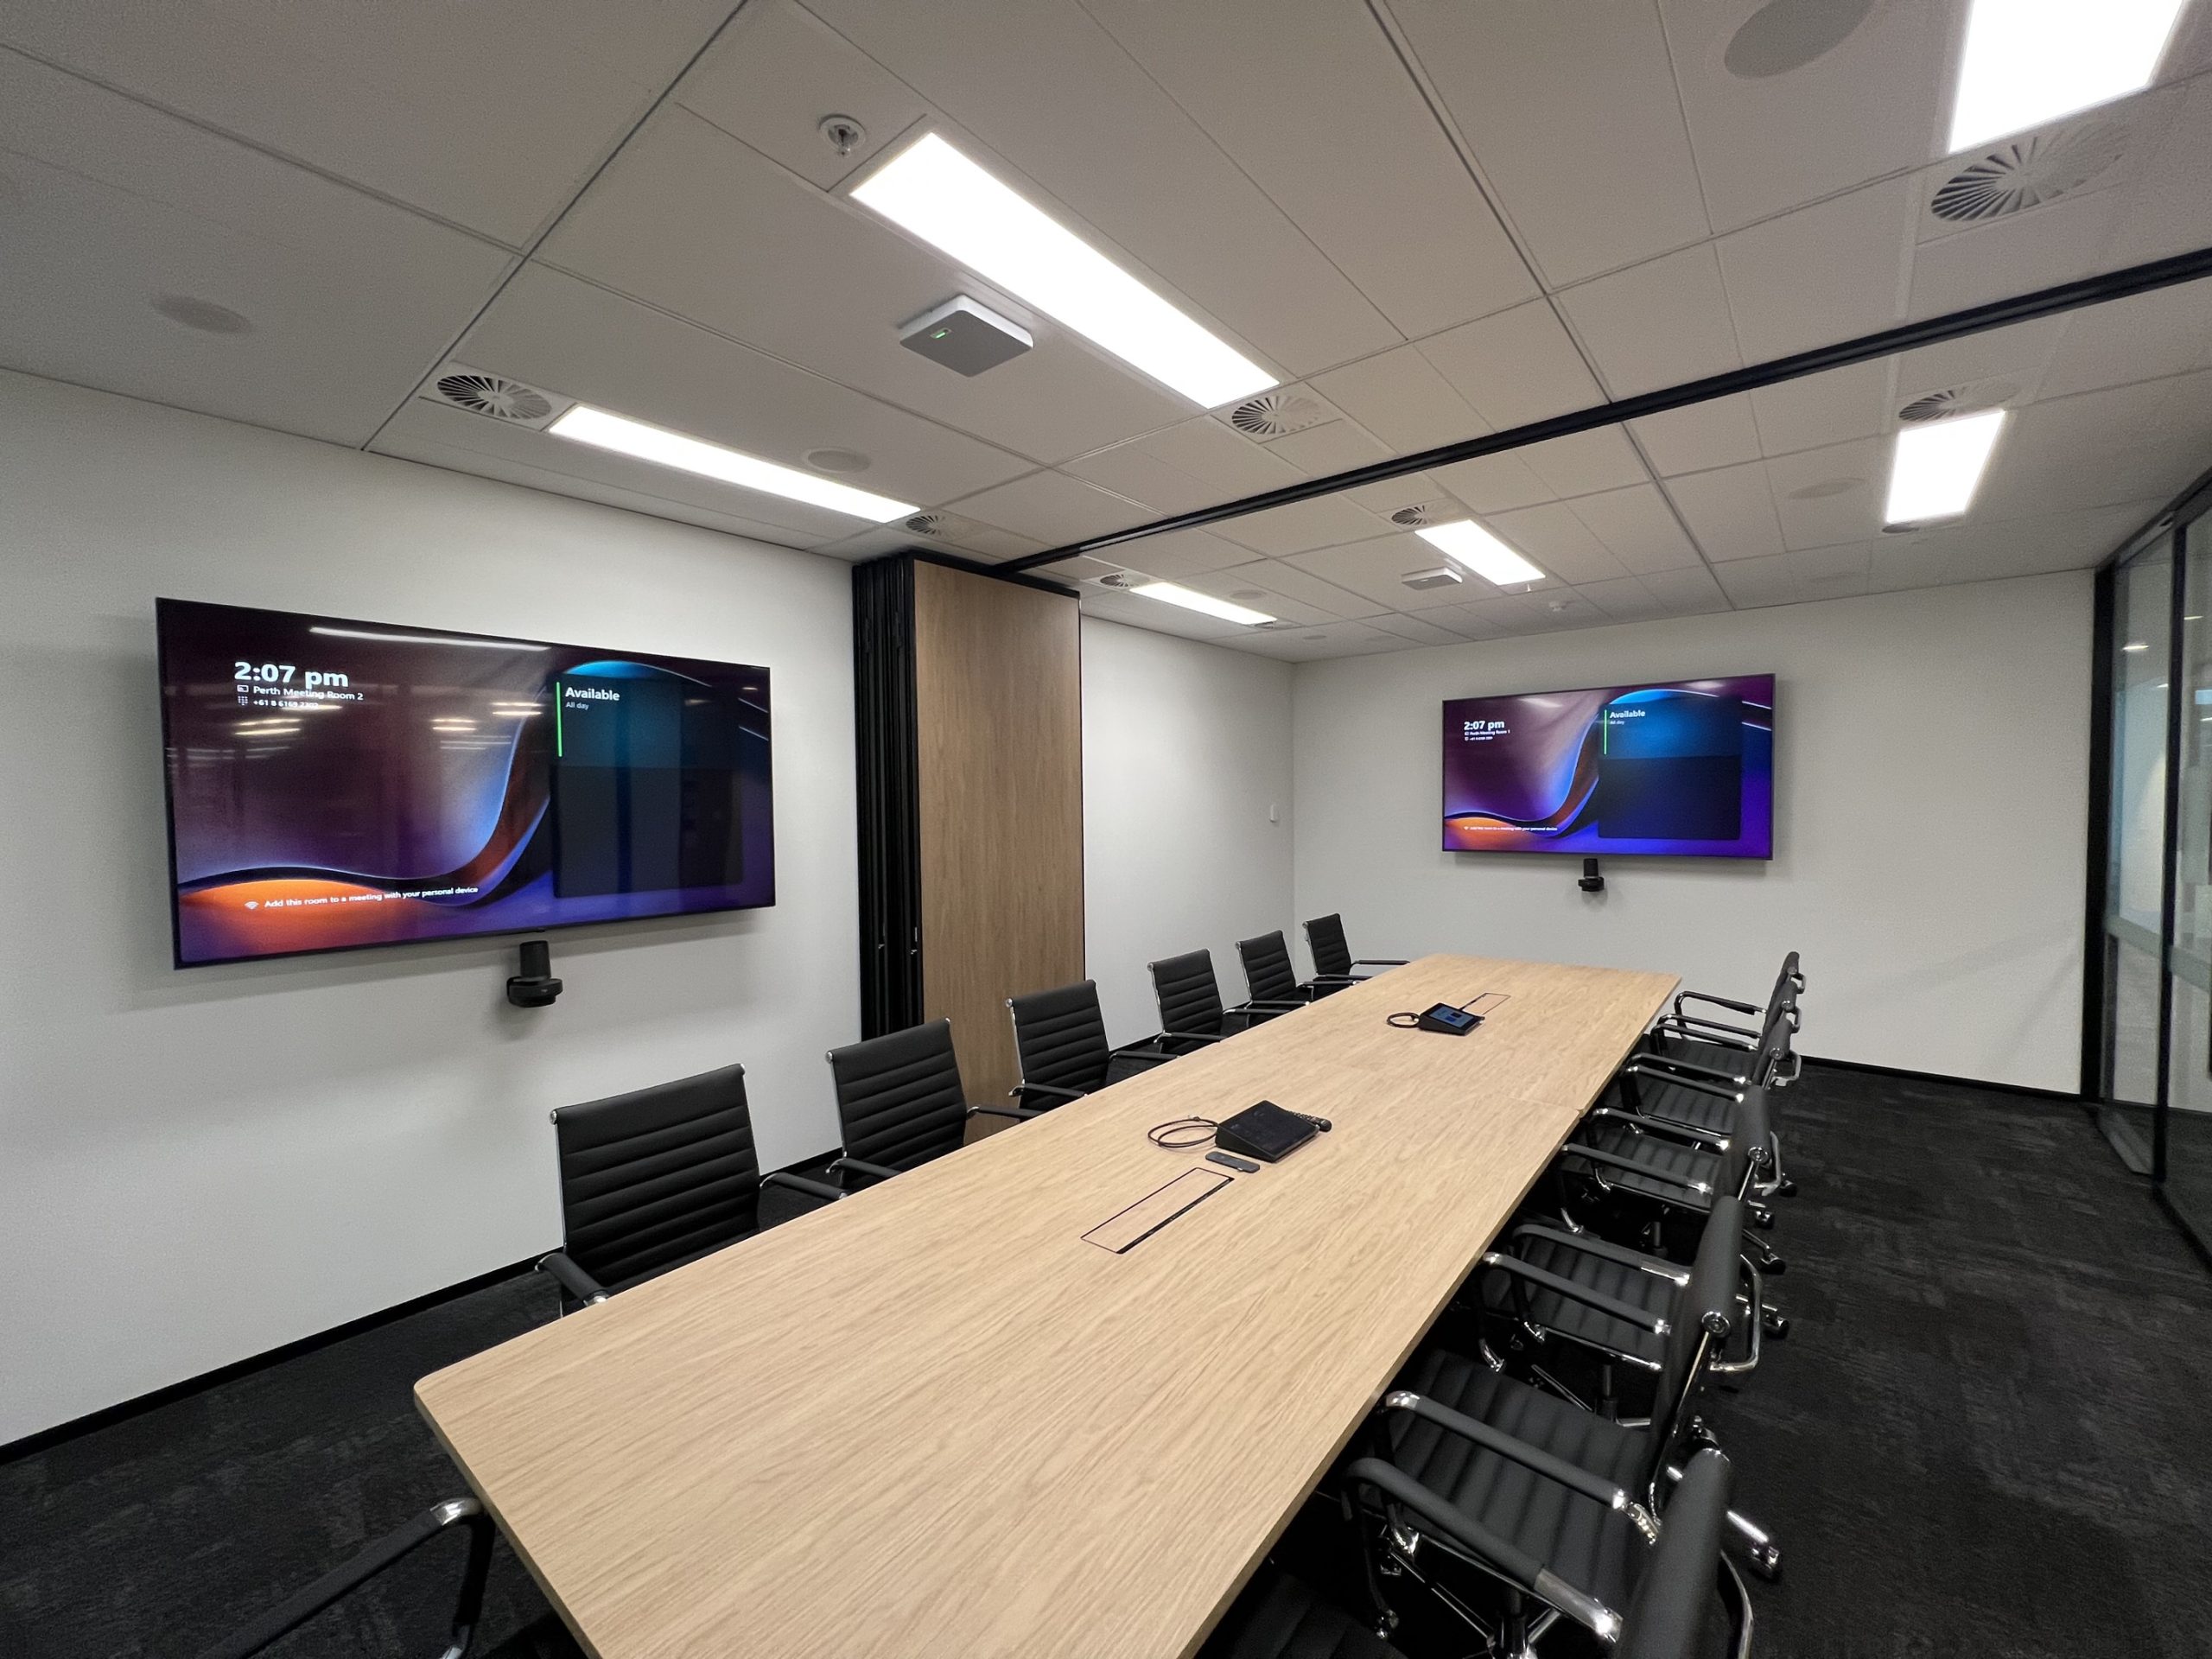 How To Create A Practical And Efficient Meeting Room – The Focus AV Guide